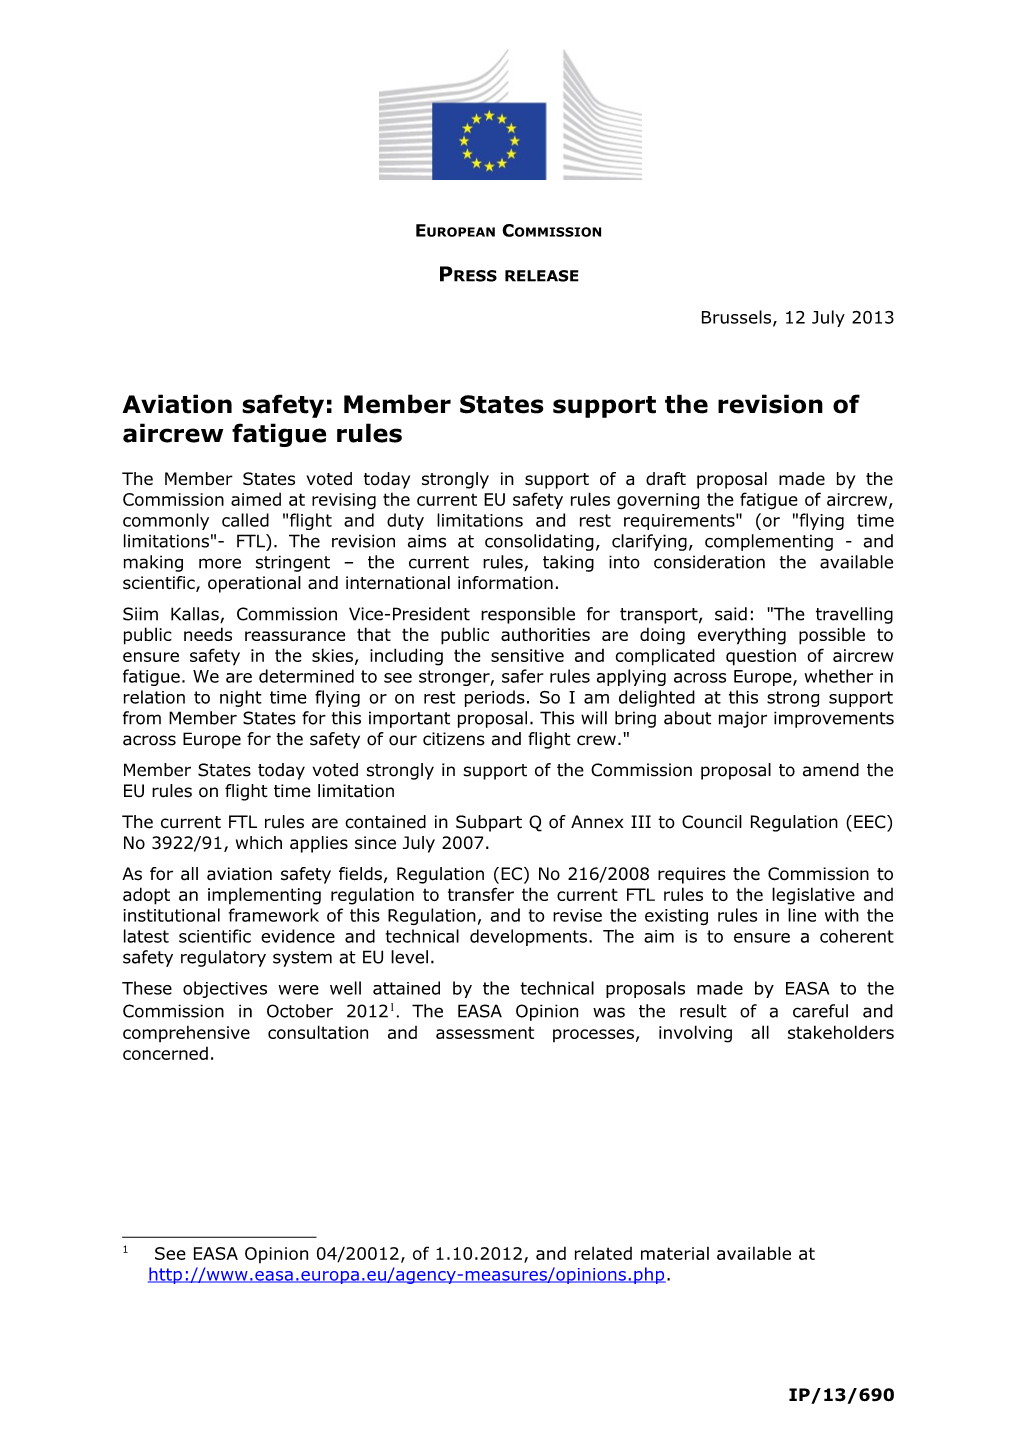 Aviation Safety: Member States Support the Revision of Aircrew Fatigue Rules